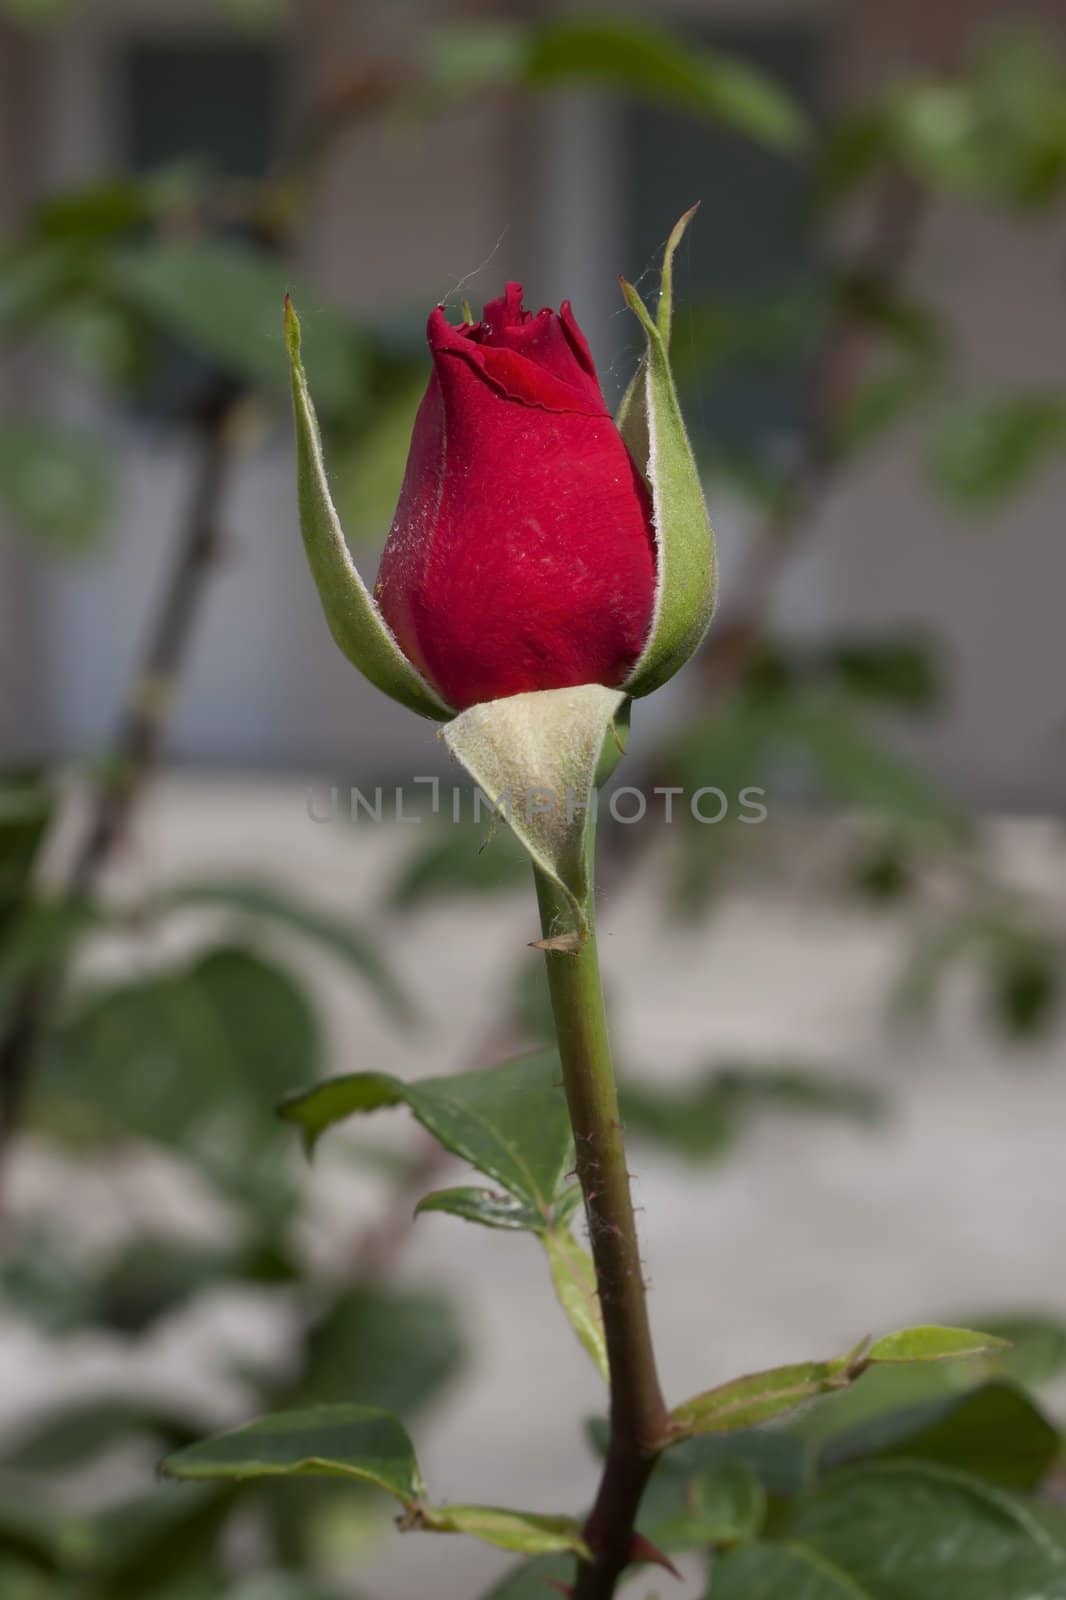 Single beautiful red rose in the garden, France.